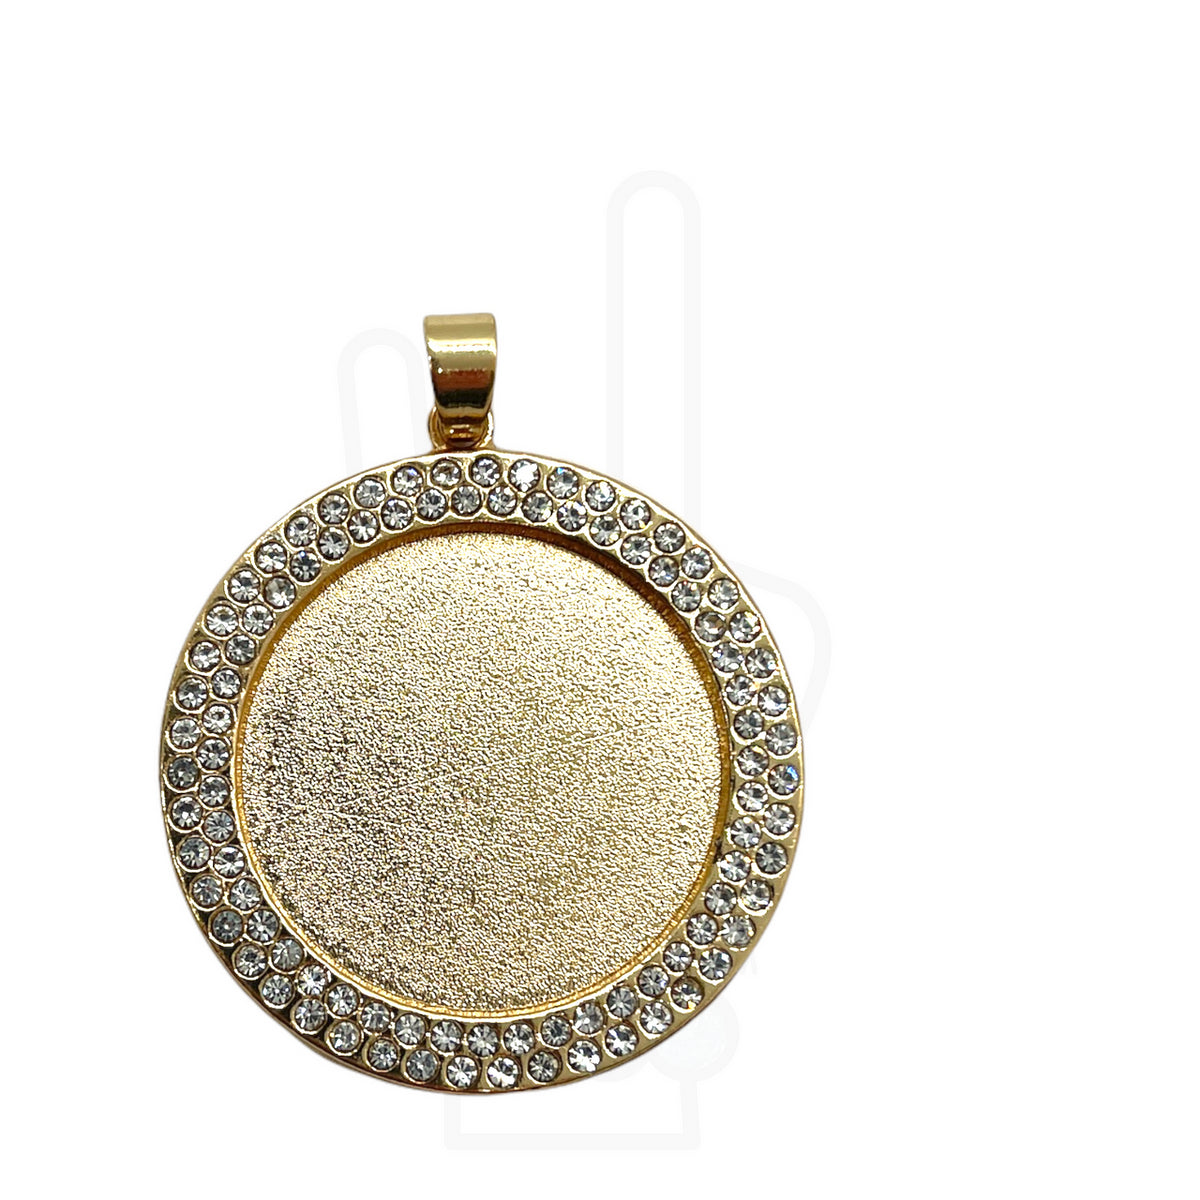 25mm Round Bezel with Rhinestones &amp; Pinch Clips Pendant Blank for UV or Epoxy Resin